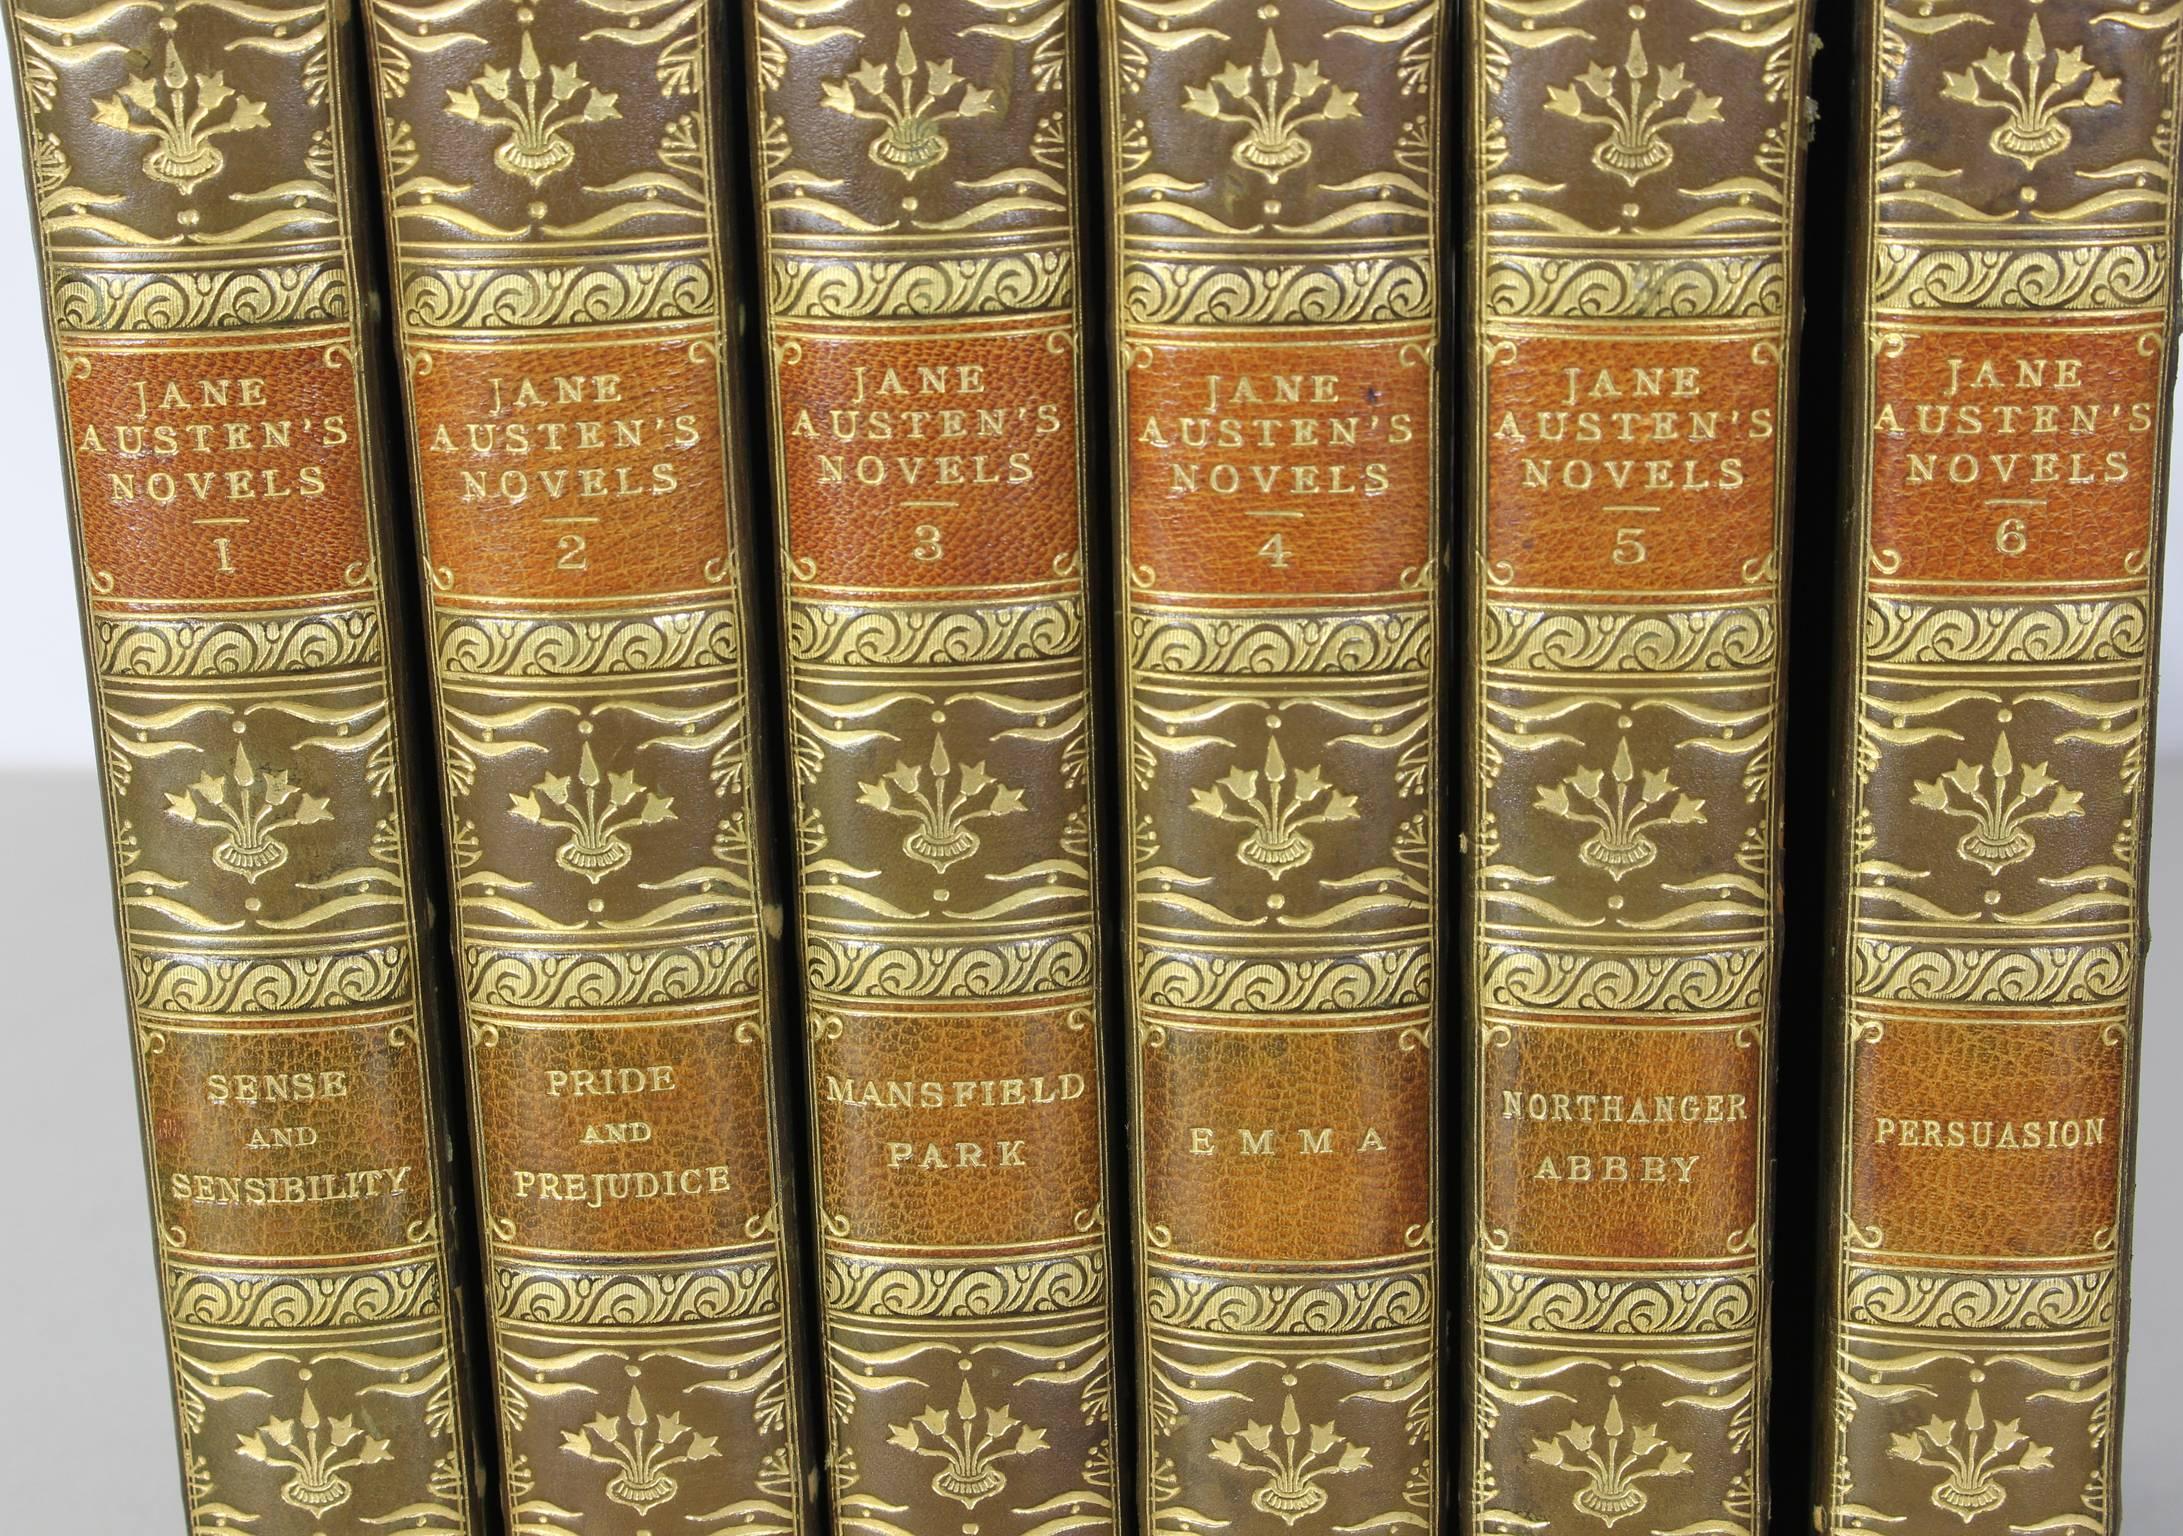 A stunning collection of all six of Jane Austin's novels published by J. M. Dent & Sons; New York: E.P. Dutton & Co. London, 1922. Contemporary half green calf, with publisher's cloth. Gilt tooling upper and lower board. Spine in six compartments of